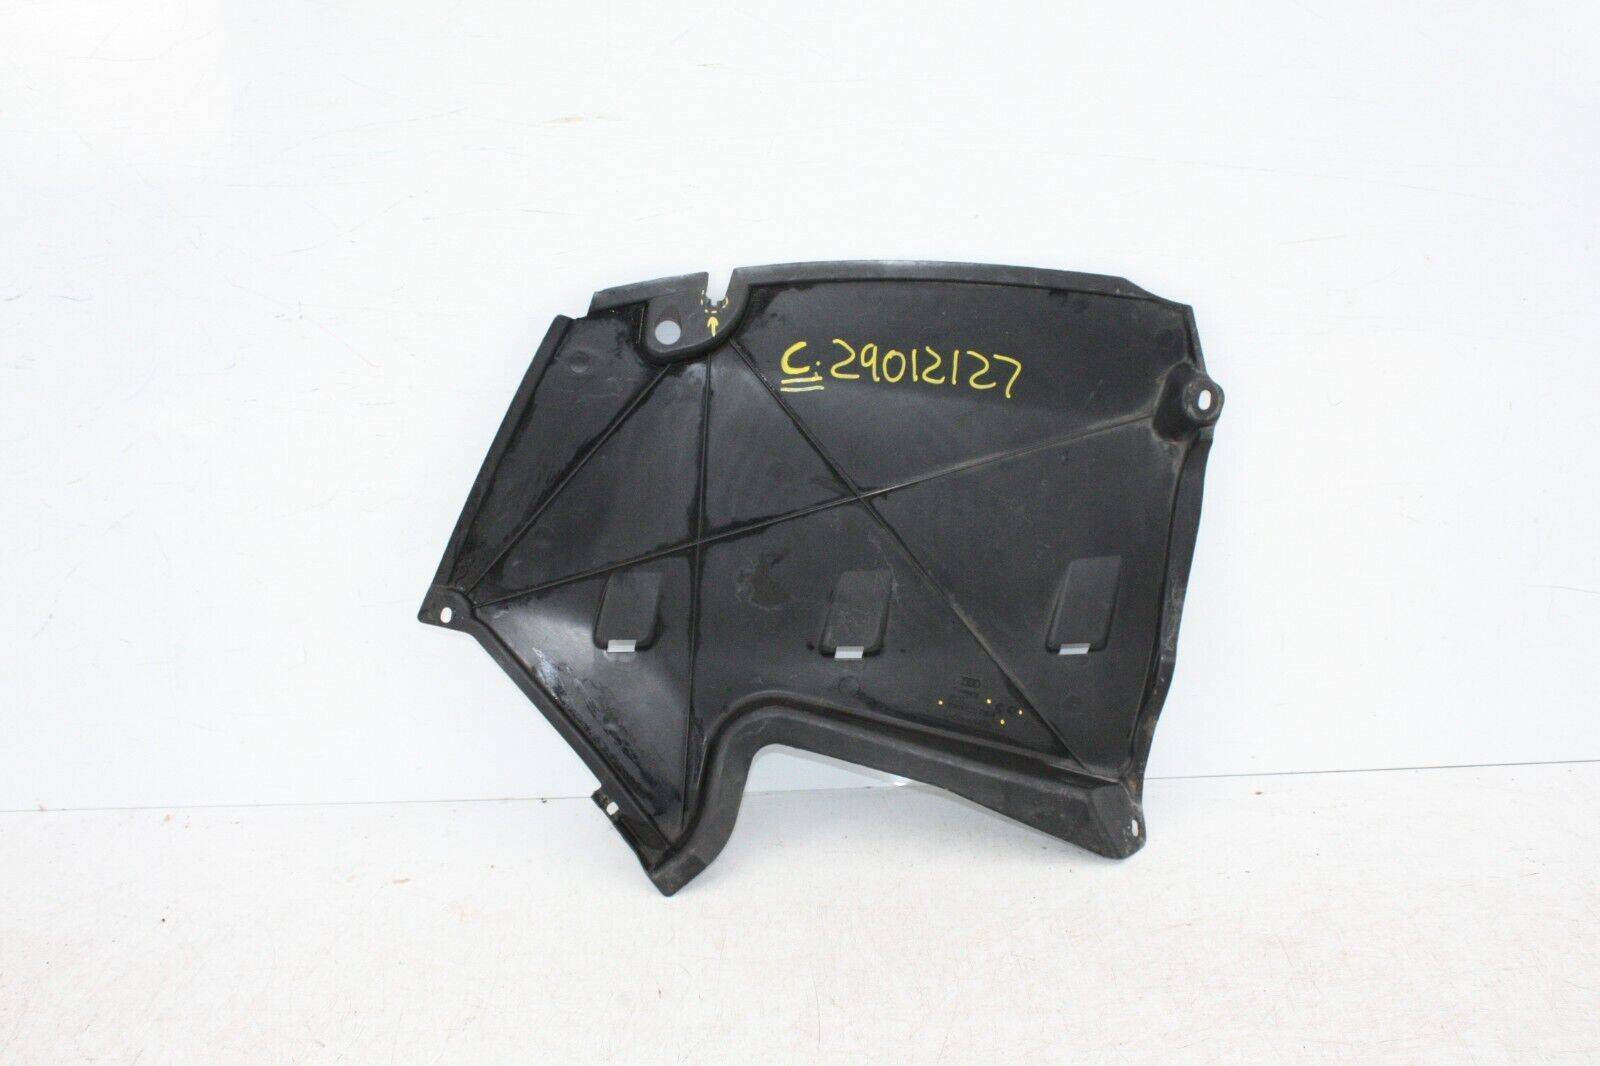 Audi-A4-Rear-Right-Underbody-Tray-Cover-2015-TO-2018-8W0825219A-175367535392-6